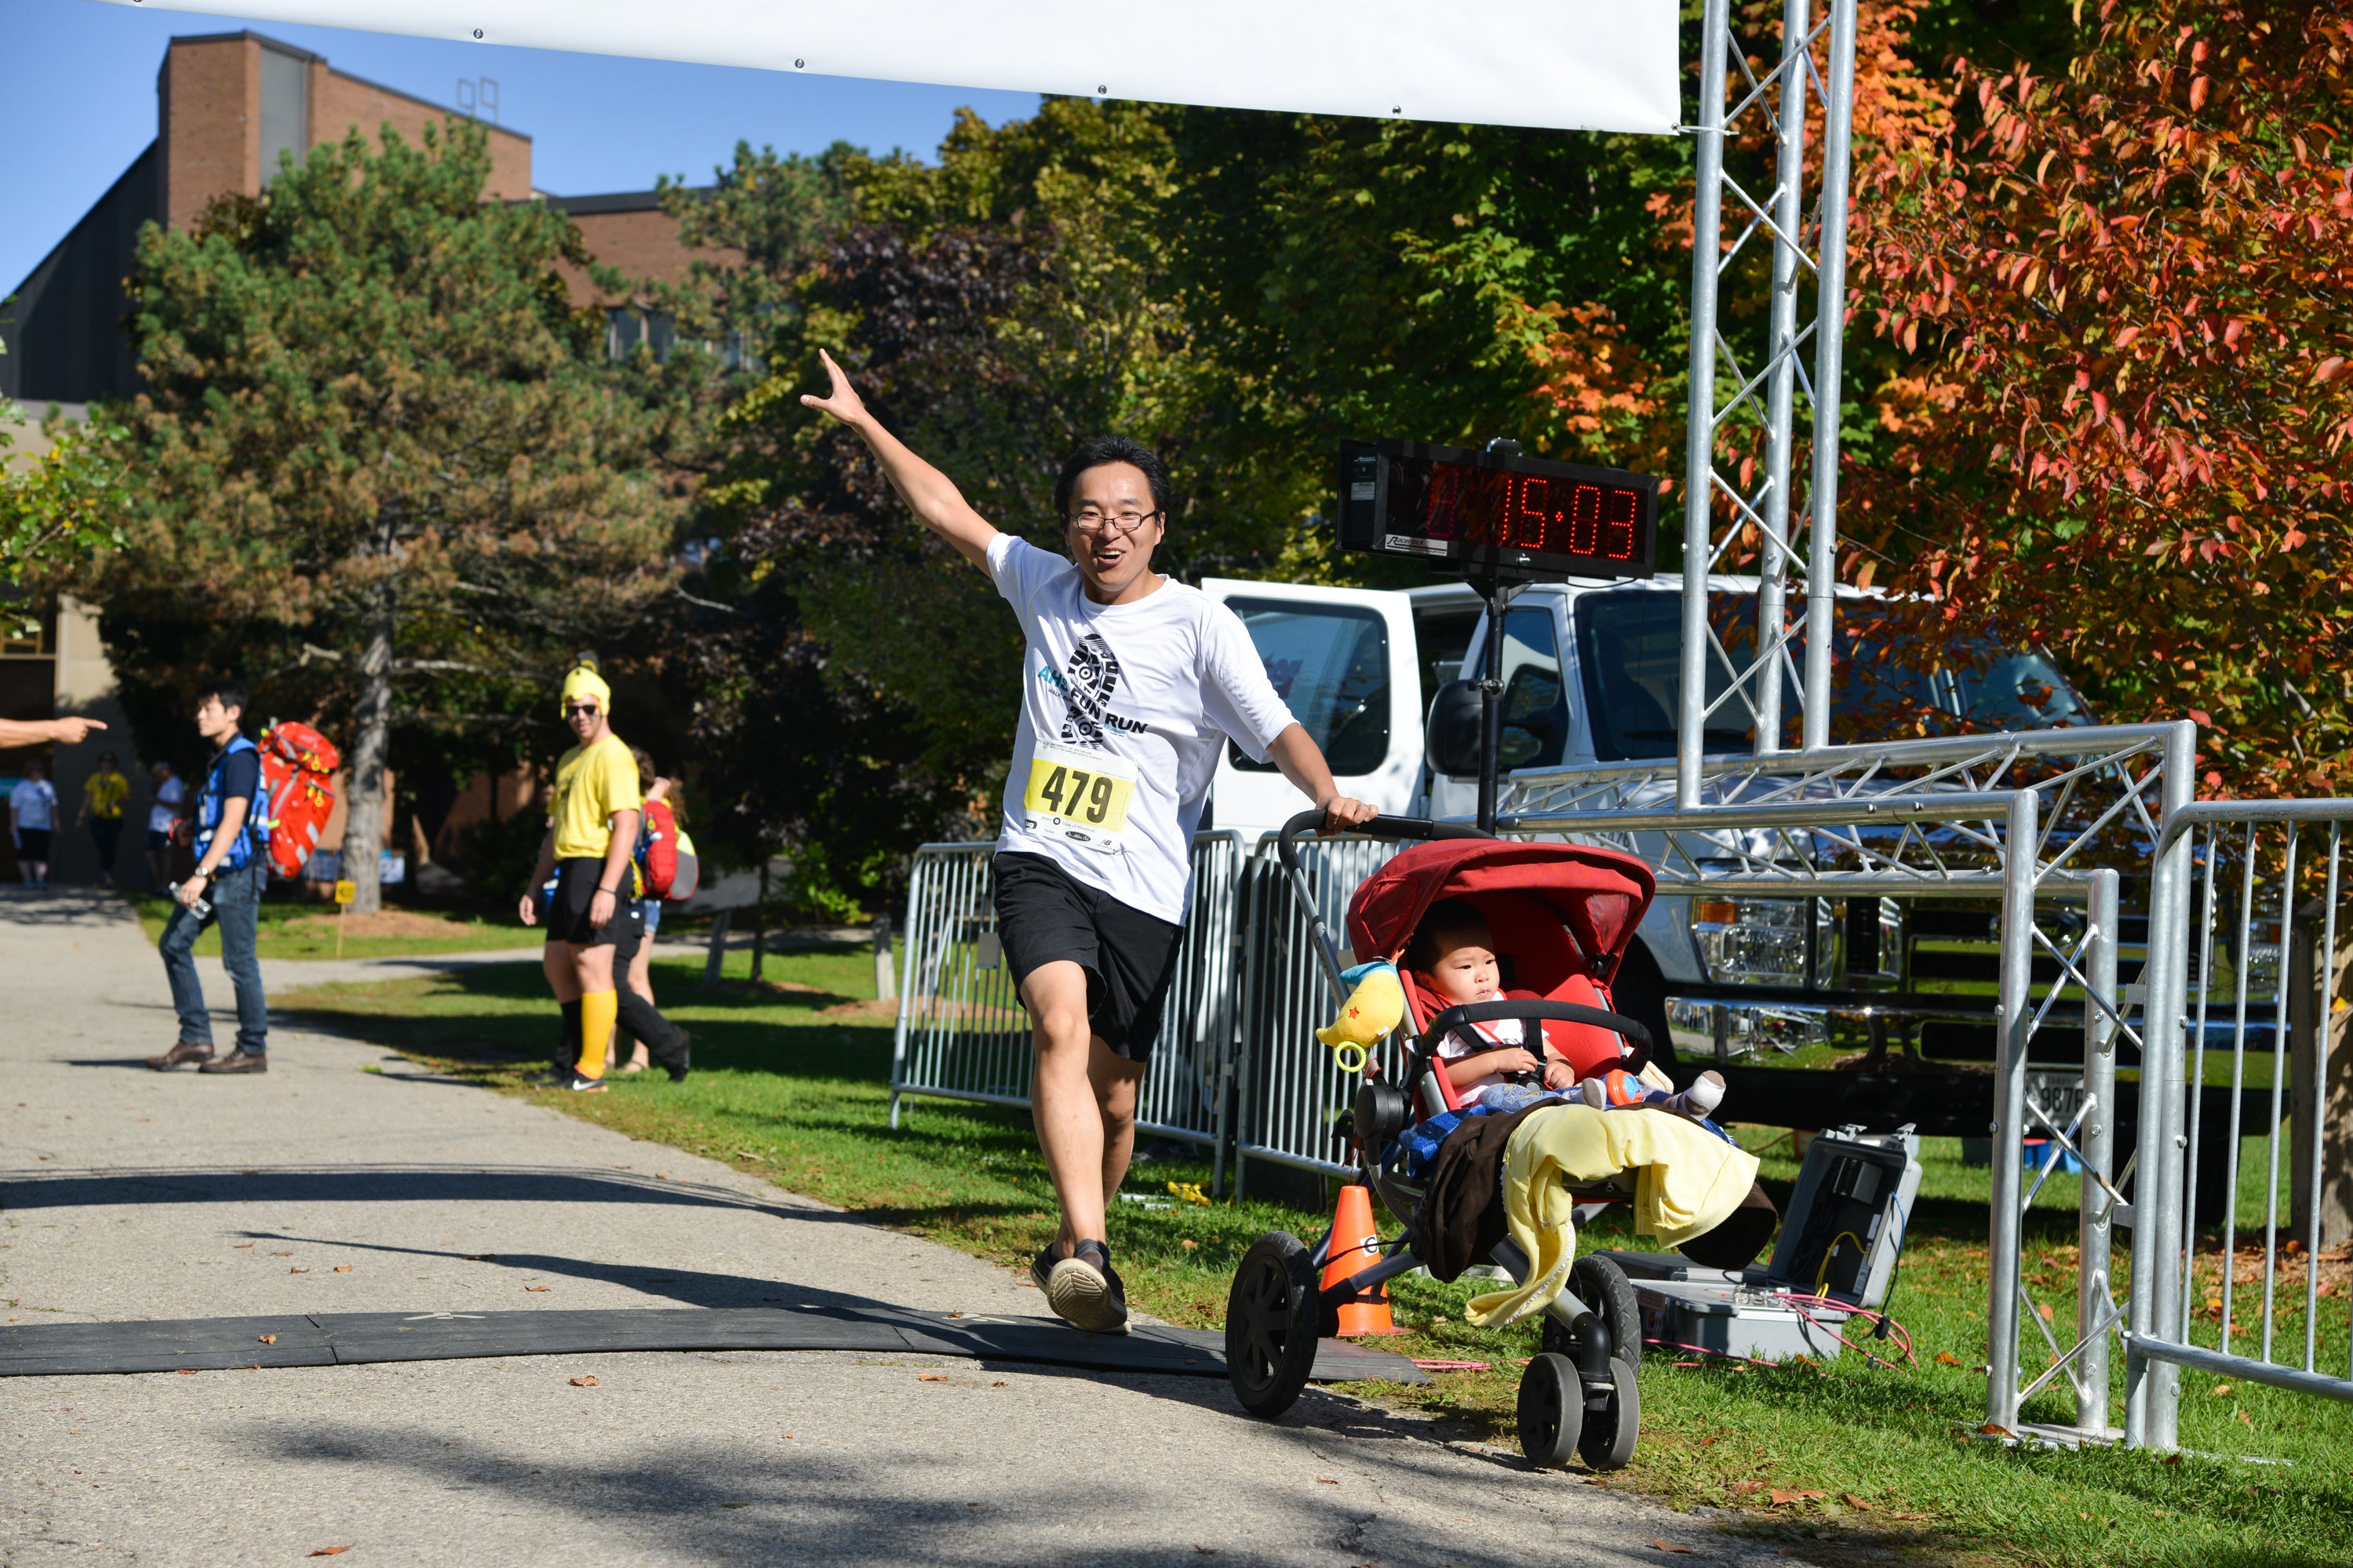 Participant pushing stroller passing the finish line